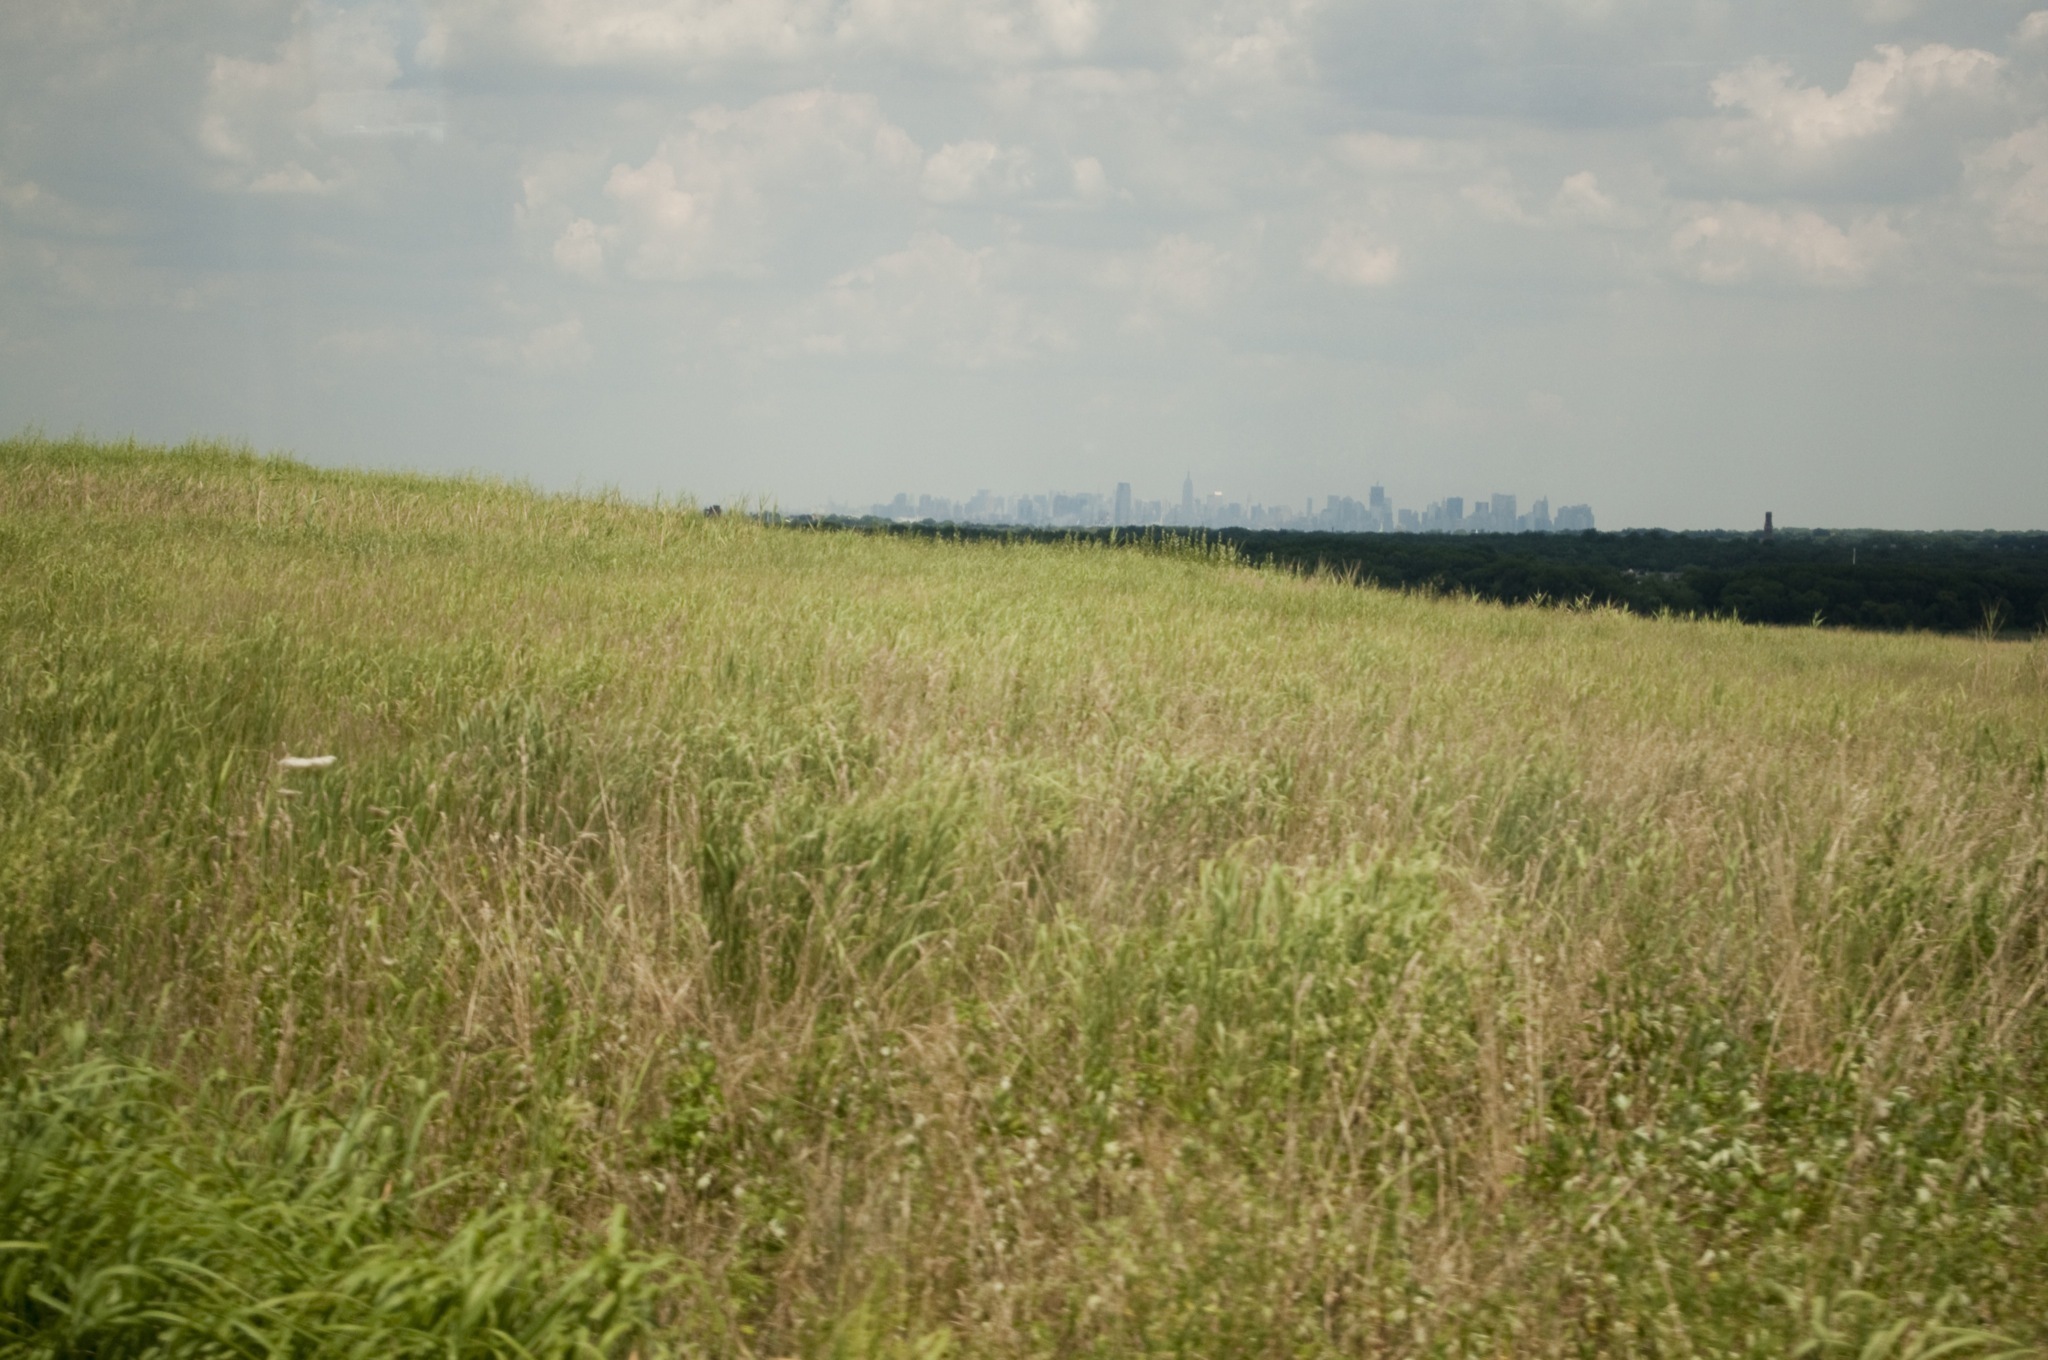 Freshkills Park grasslands, with Manhattan on the horizon. <a href="https://www.flickr.com/photos/leonizzy/5952025440/" target="_blank" >Photo</a>: Leonel Pence/<a href="https://creativecommons.org/licenses/by-nc/2.0/" target="_blank" >CC BY-NC 2.0</a>